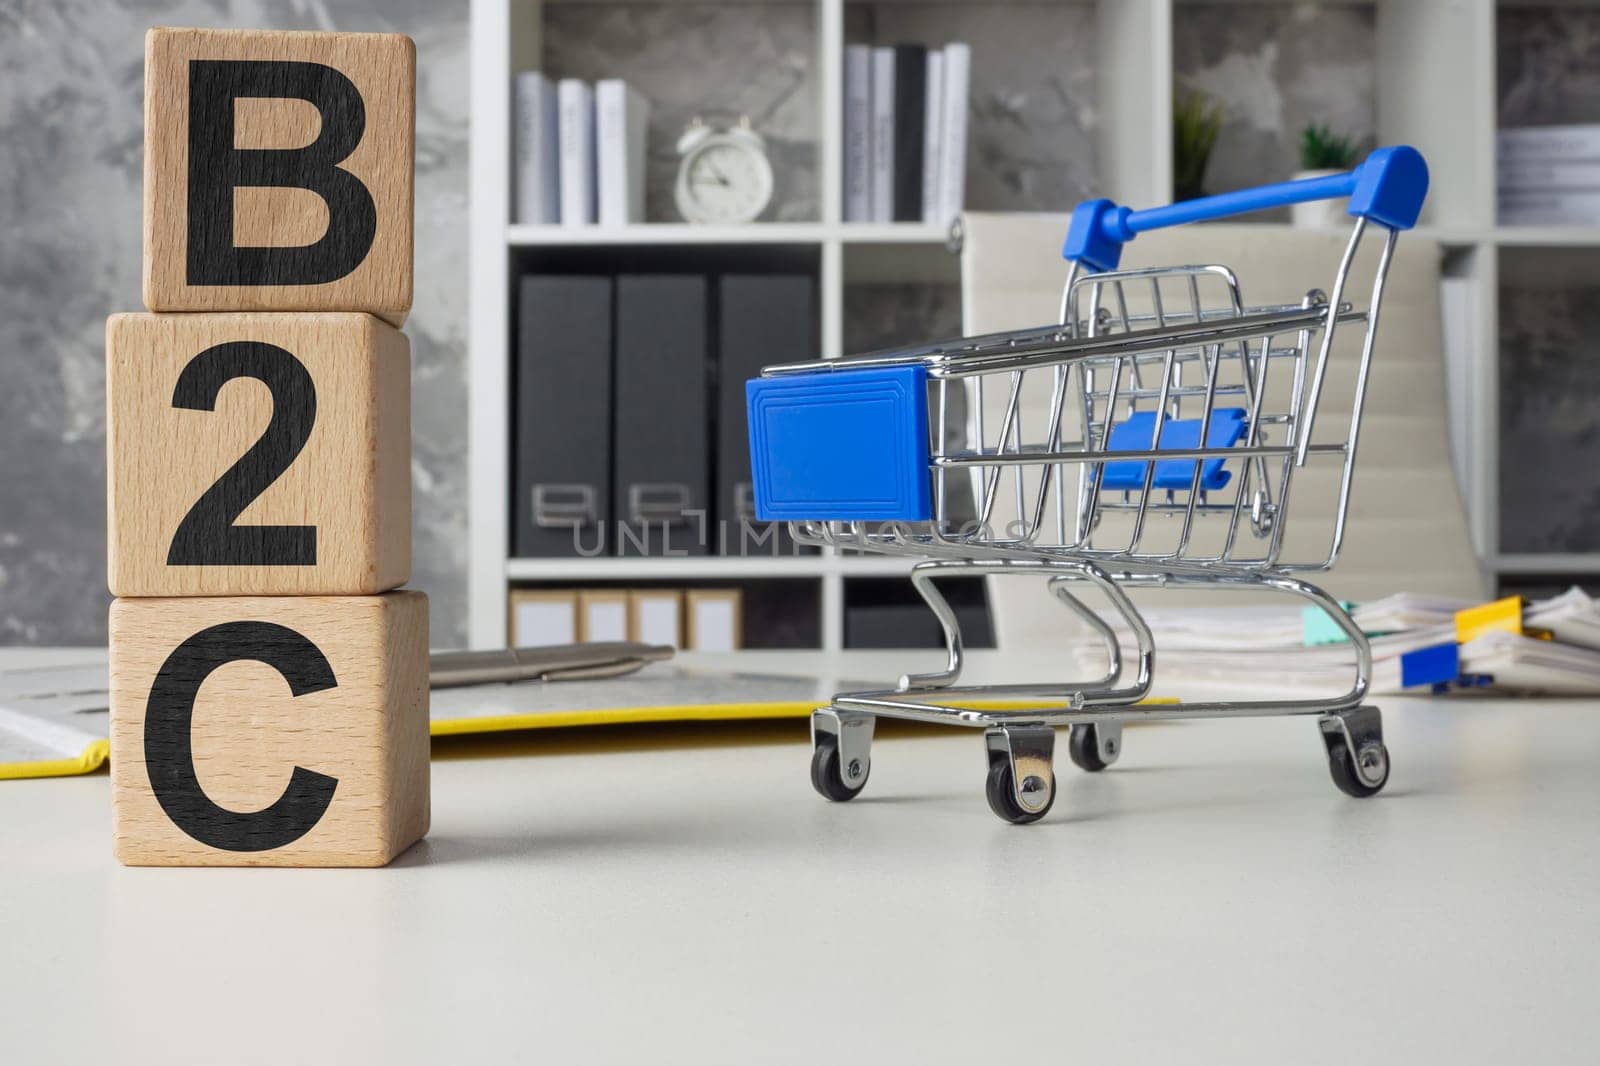 Cubes B2C Business to Consumer and shopping cart. by designer491